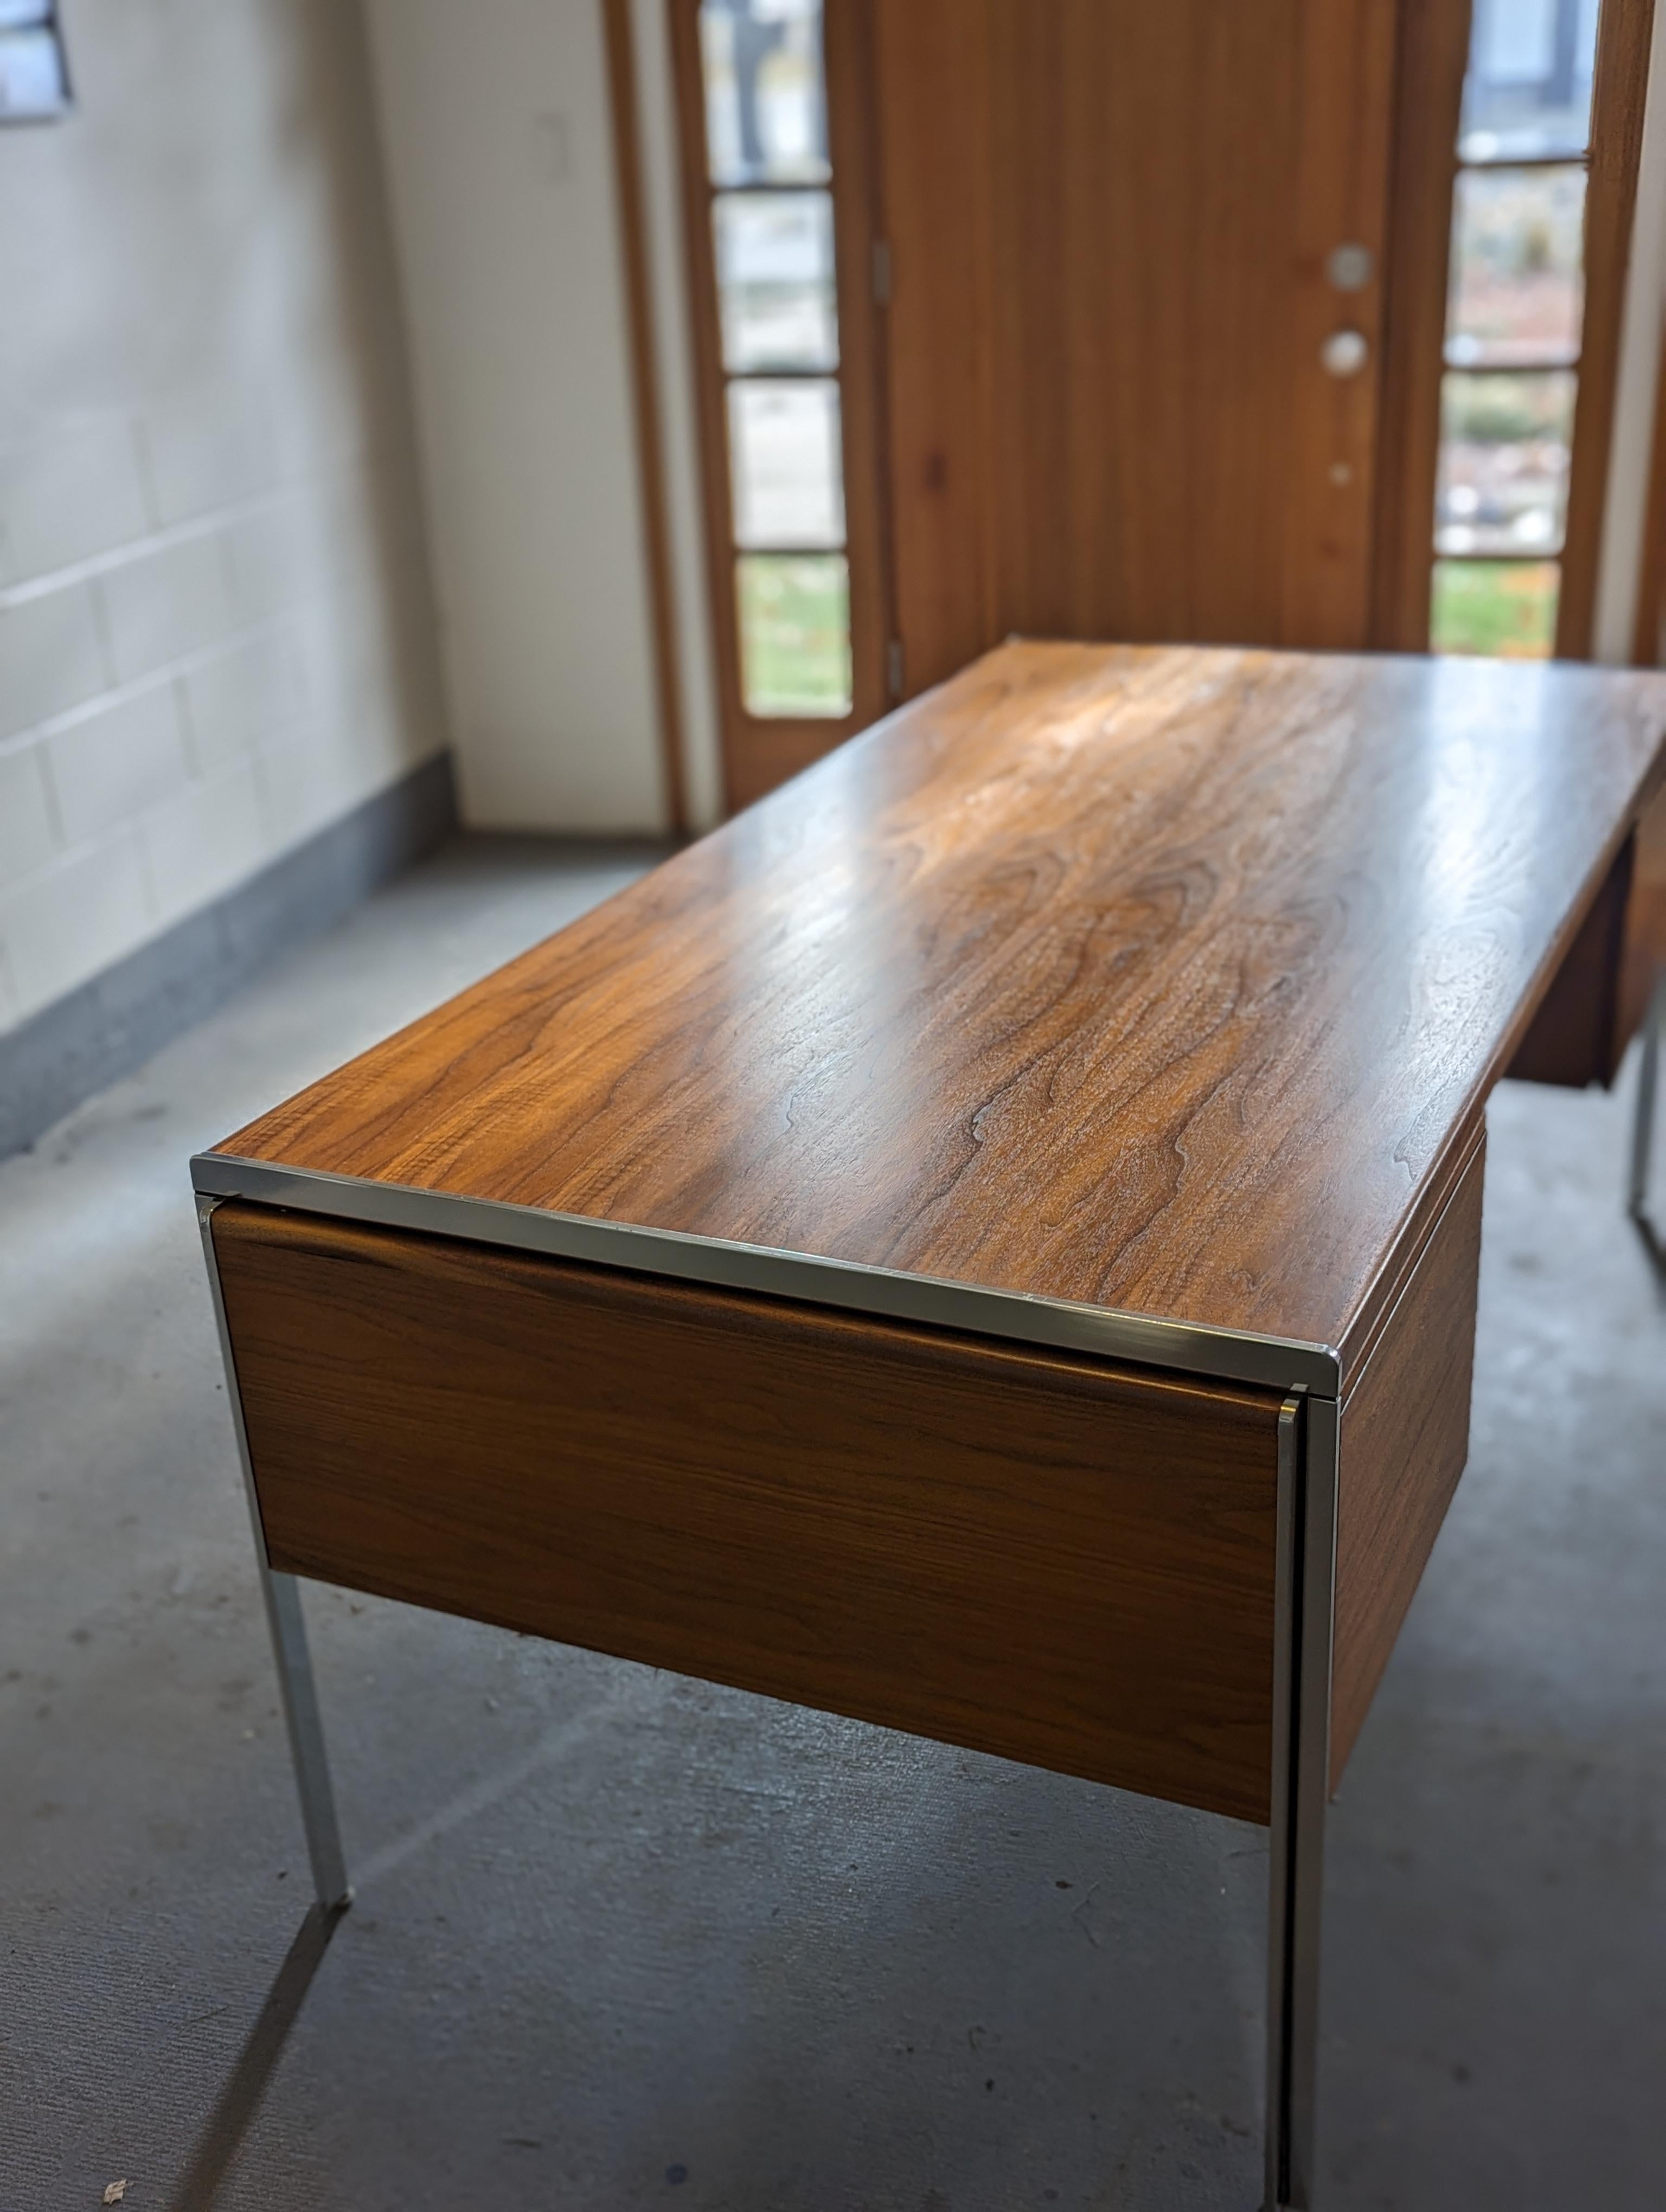 Stunning walnut color and figure present on this expansive executive desk designed by Alexis Yermakov for Stow Davis' 